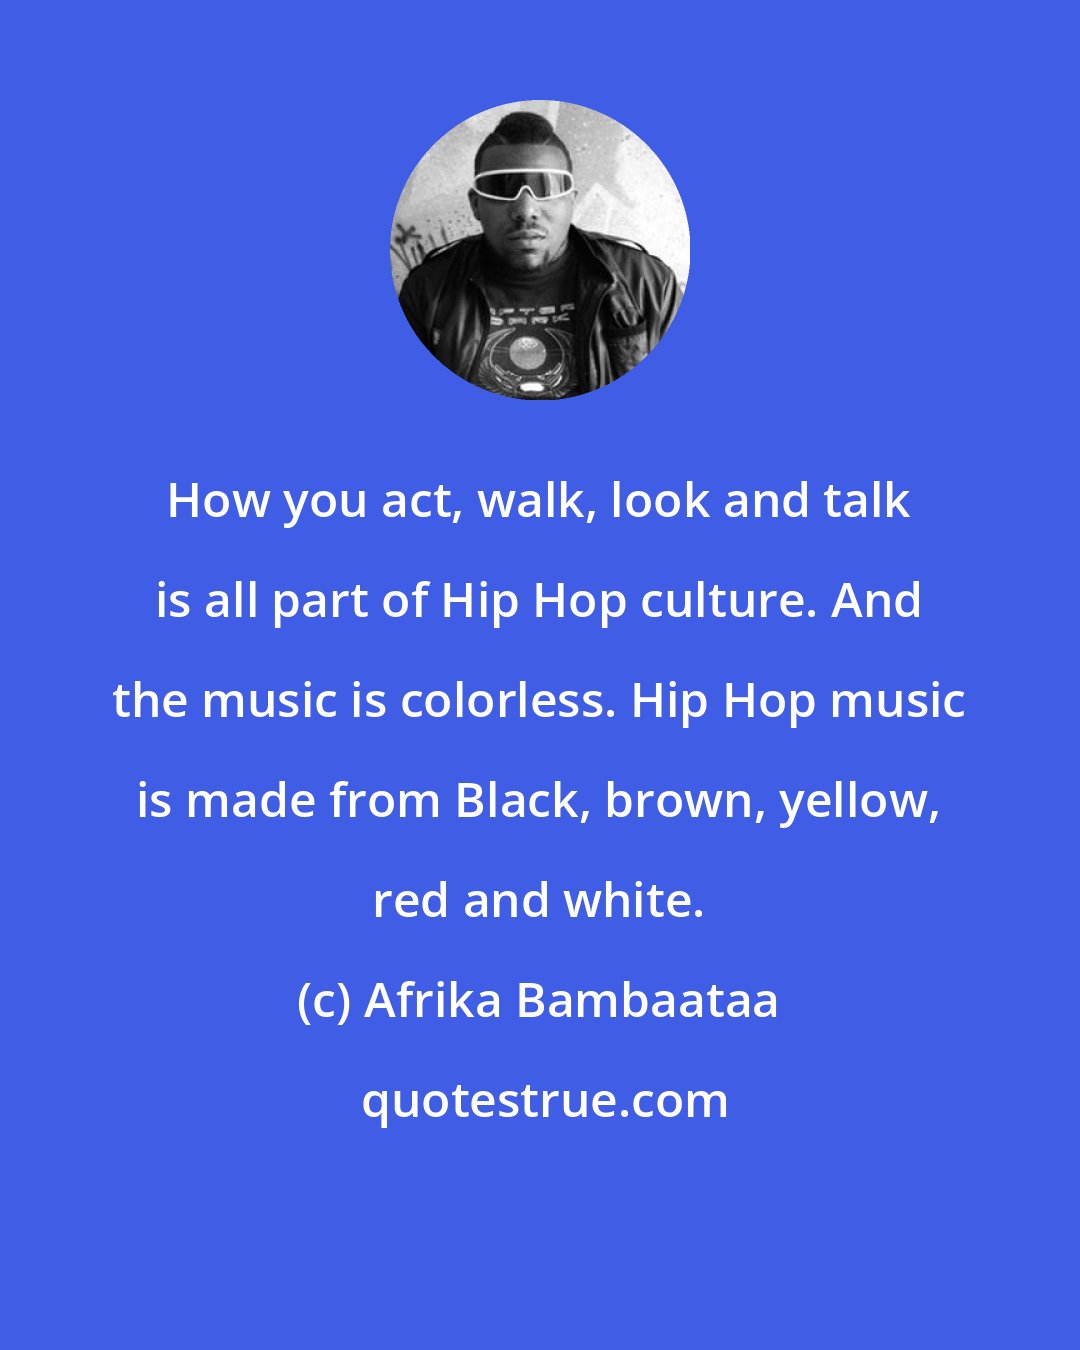 Afrika Bambaataa: How you act, walk, look and talk is all part of Hip Hop culture. And the music is colorless. Hip Hop music is made from Black, brown, yellow, red and white.